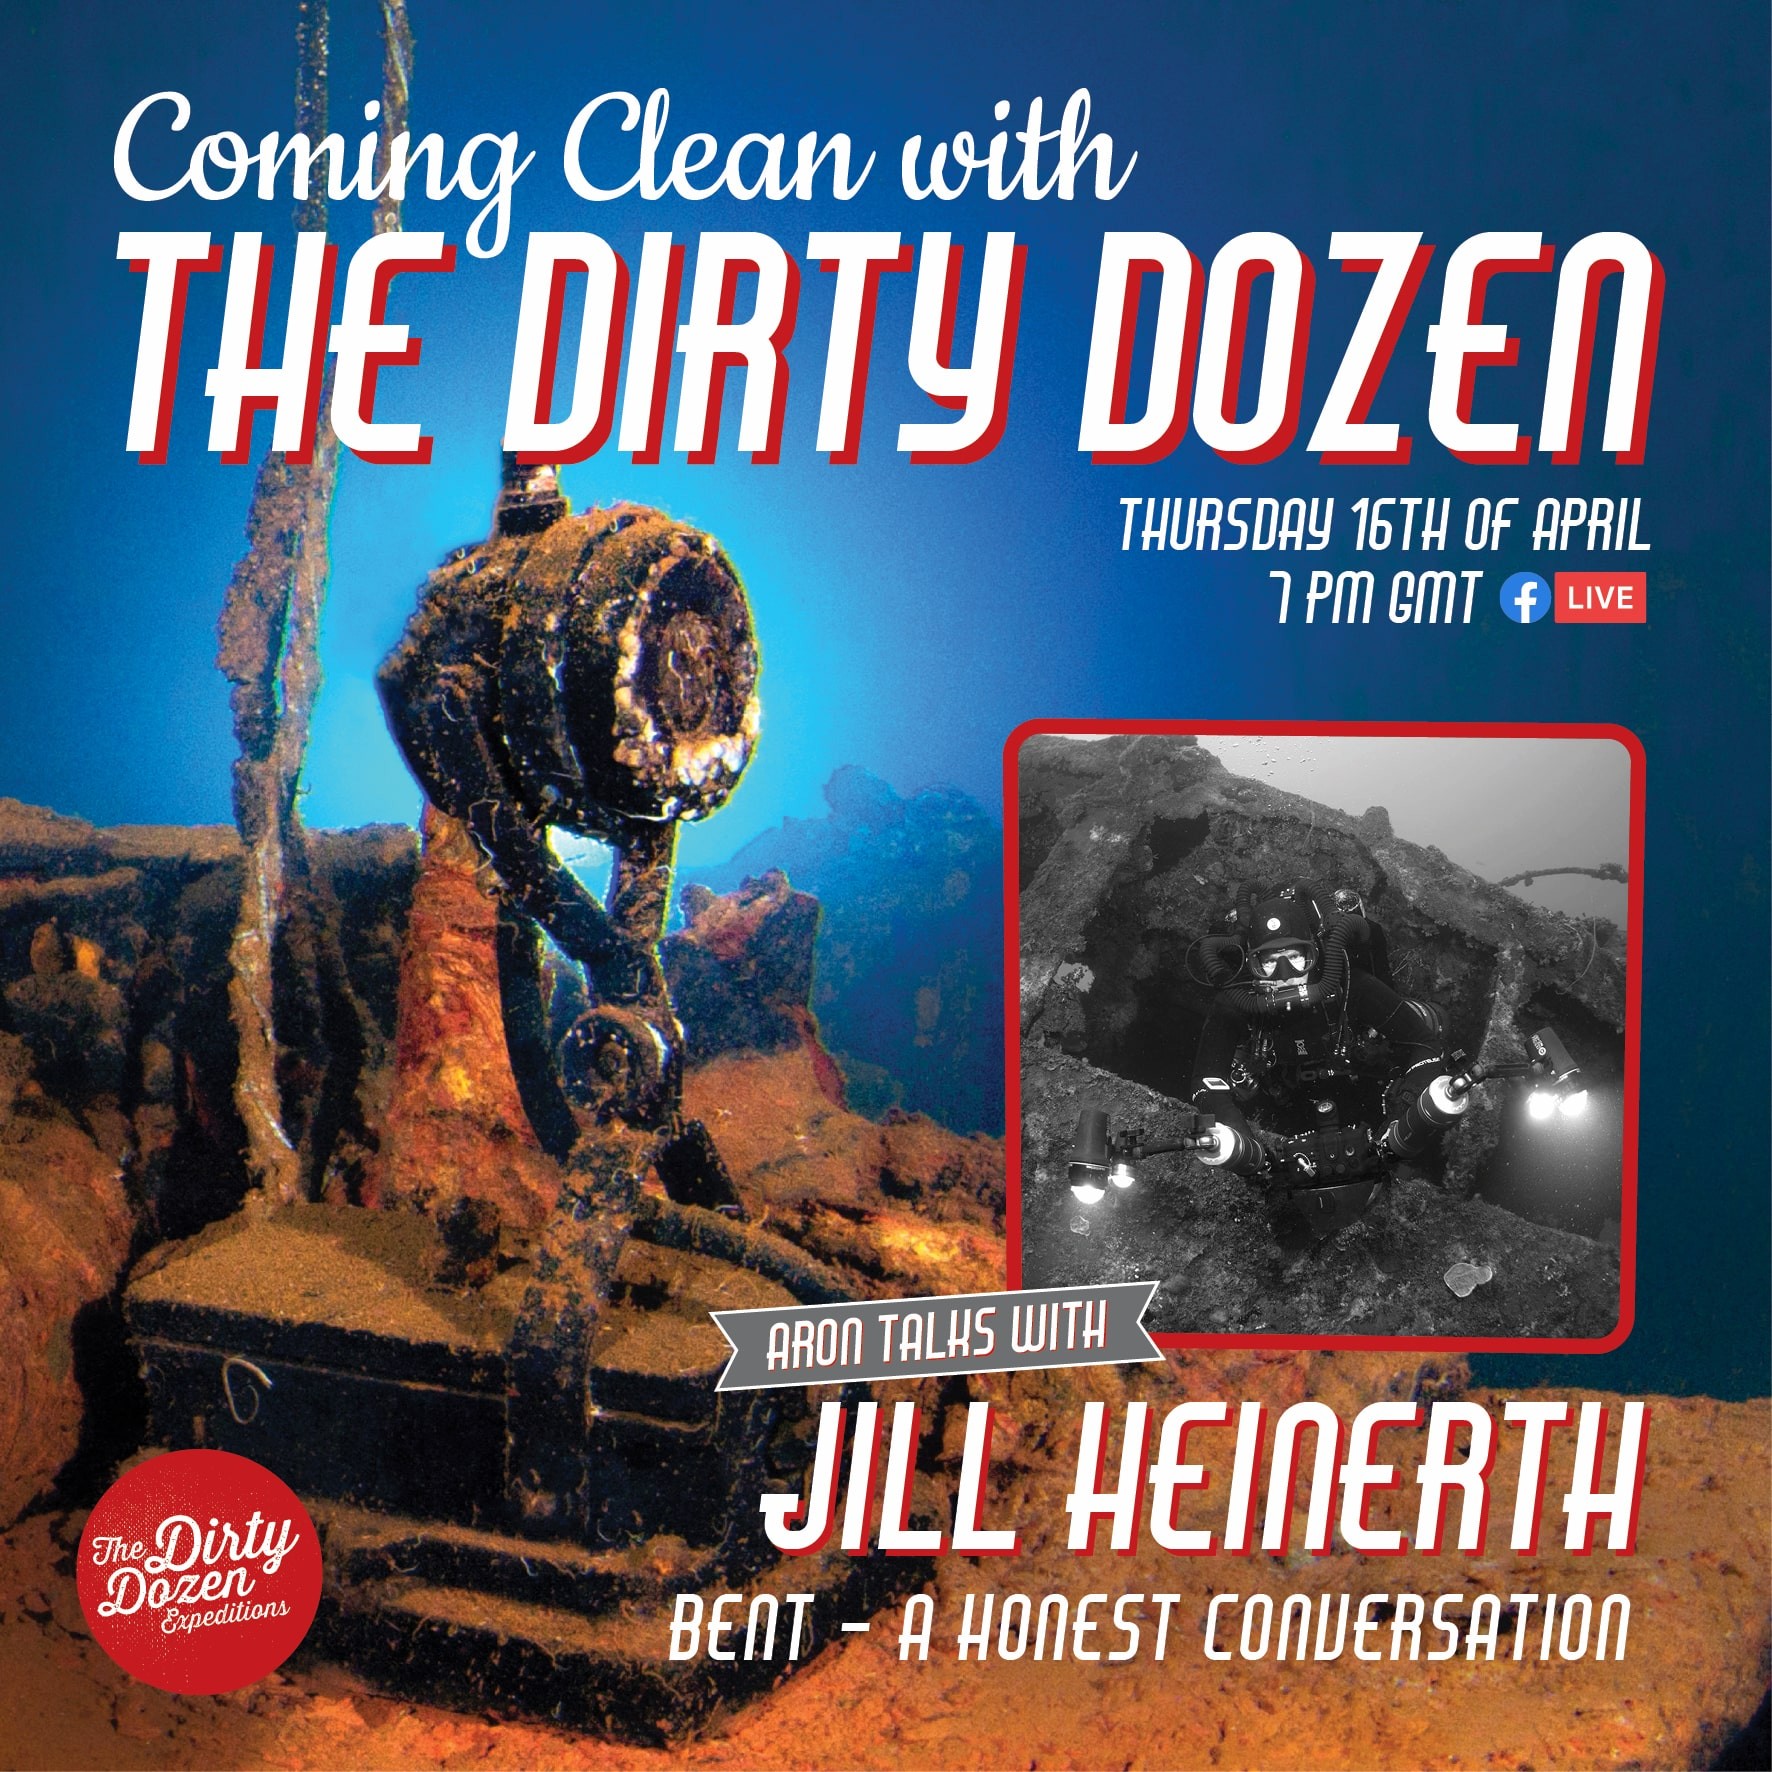 Dirty Dozen Expeditions Launch New Live Broadcast During COVID-19 Lockdown